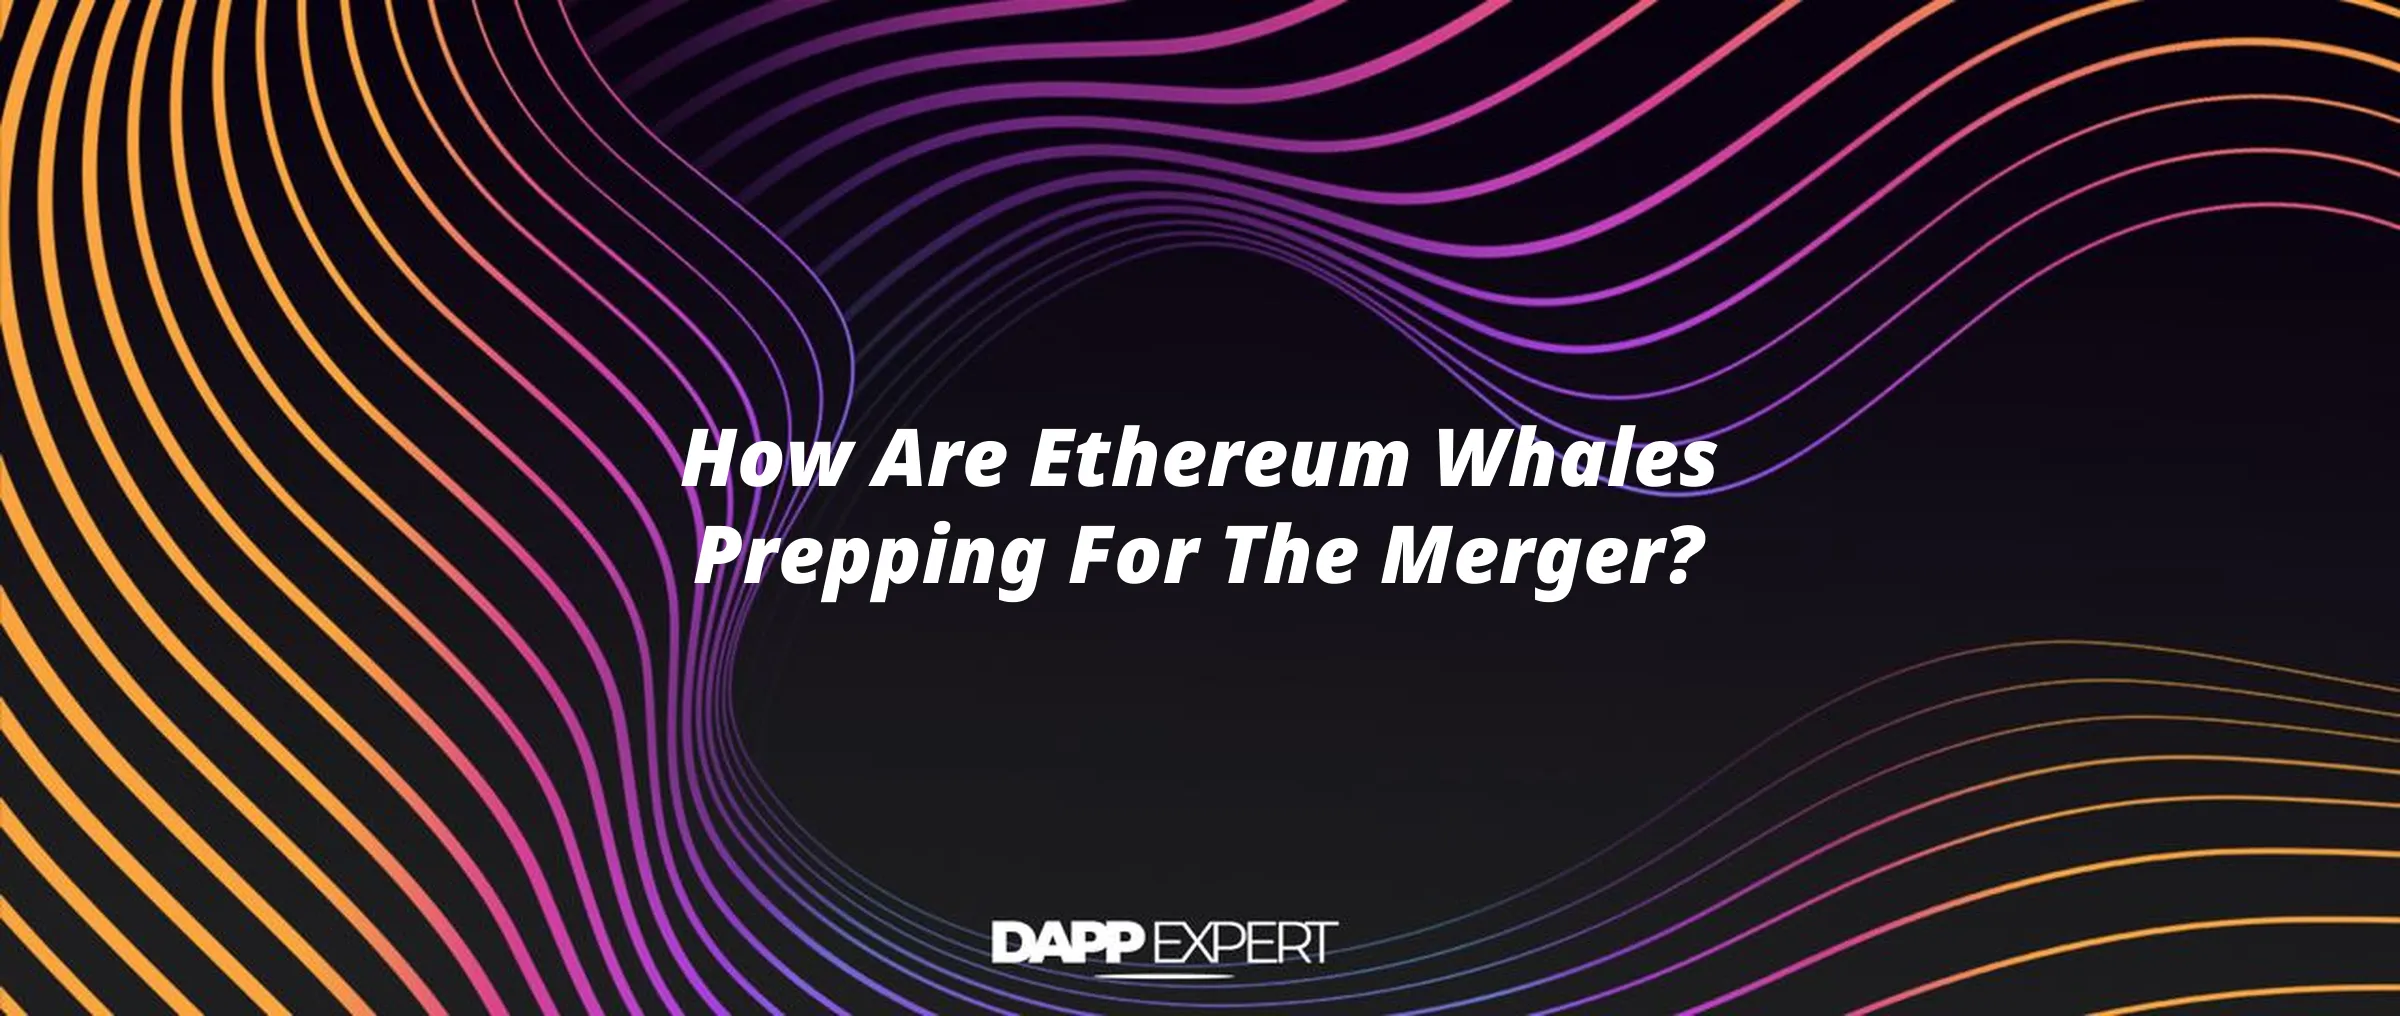 How Are Ethereum Whales Prepping For The Merger?